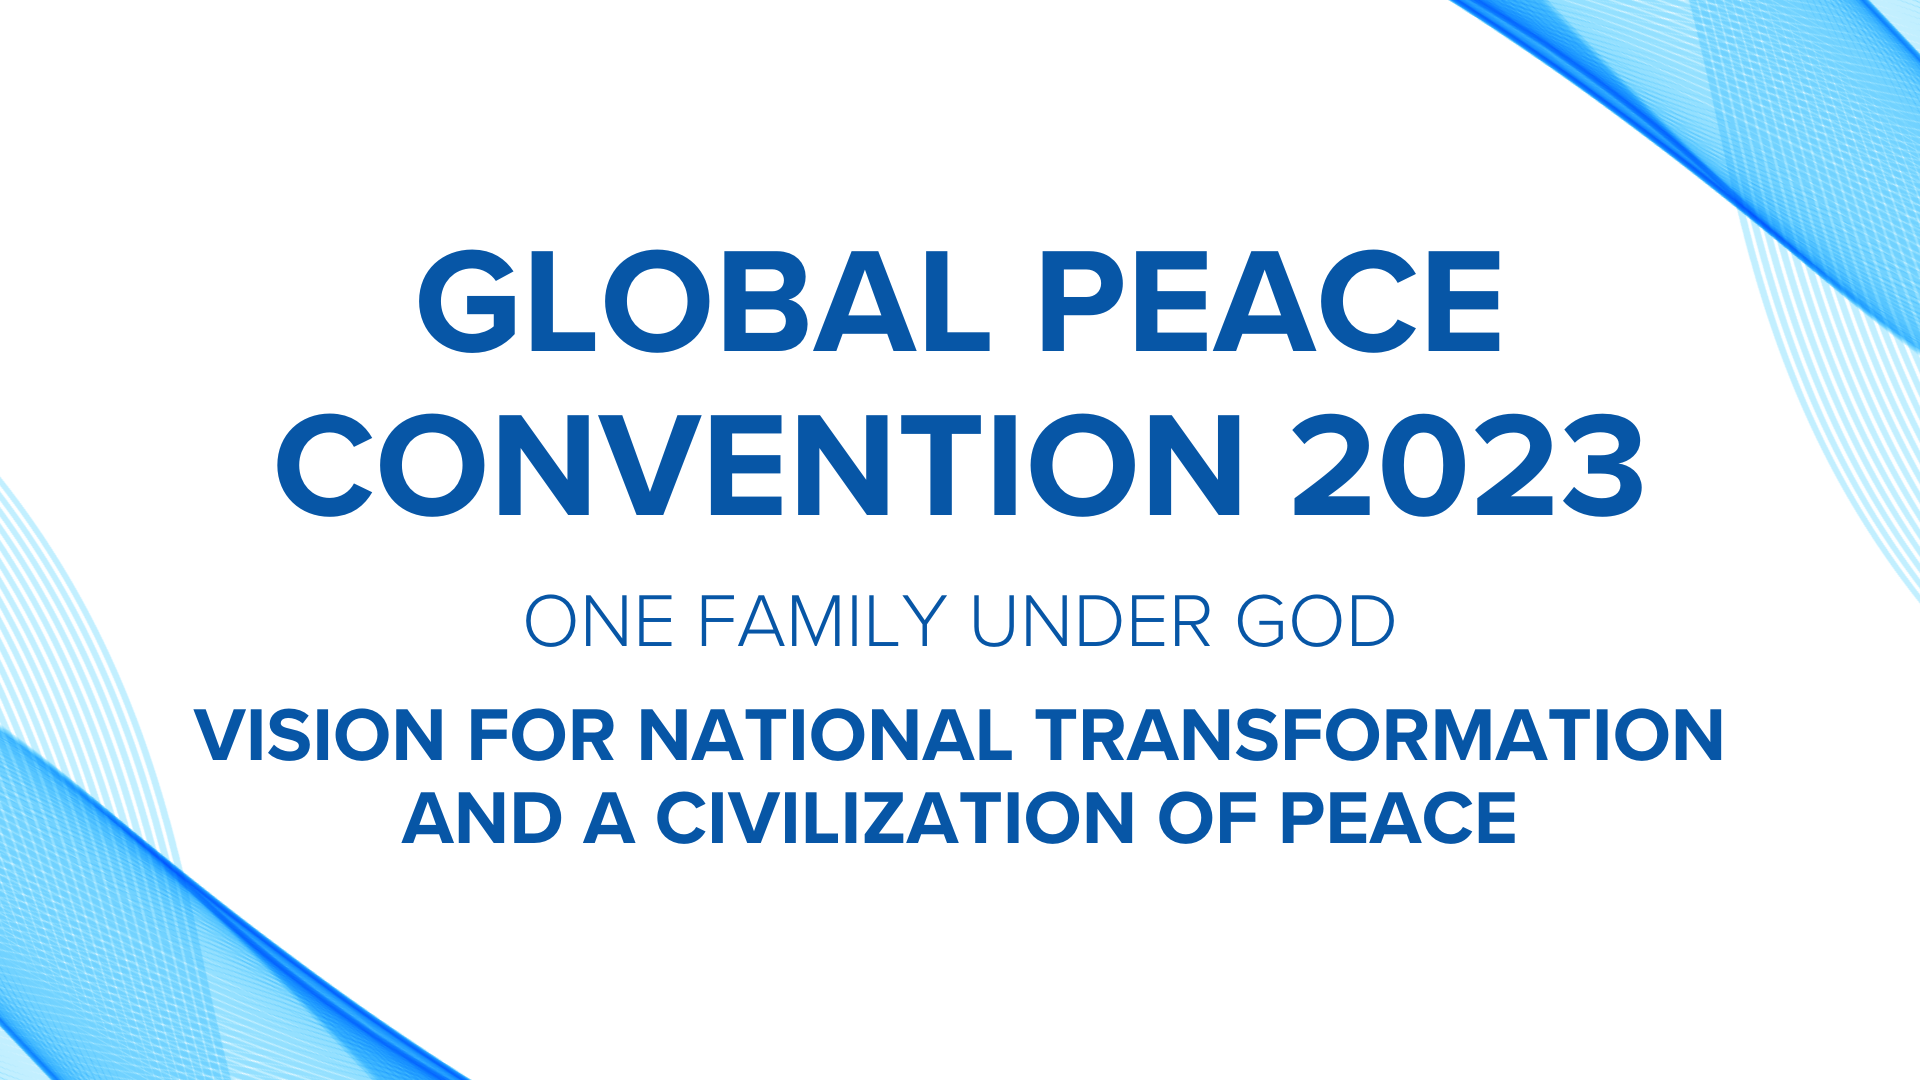 Global Peace Convention envisions the transformation of families worldwide, fostering a civilization of peace by 2023.